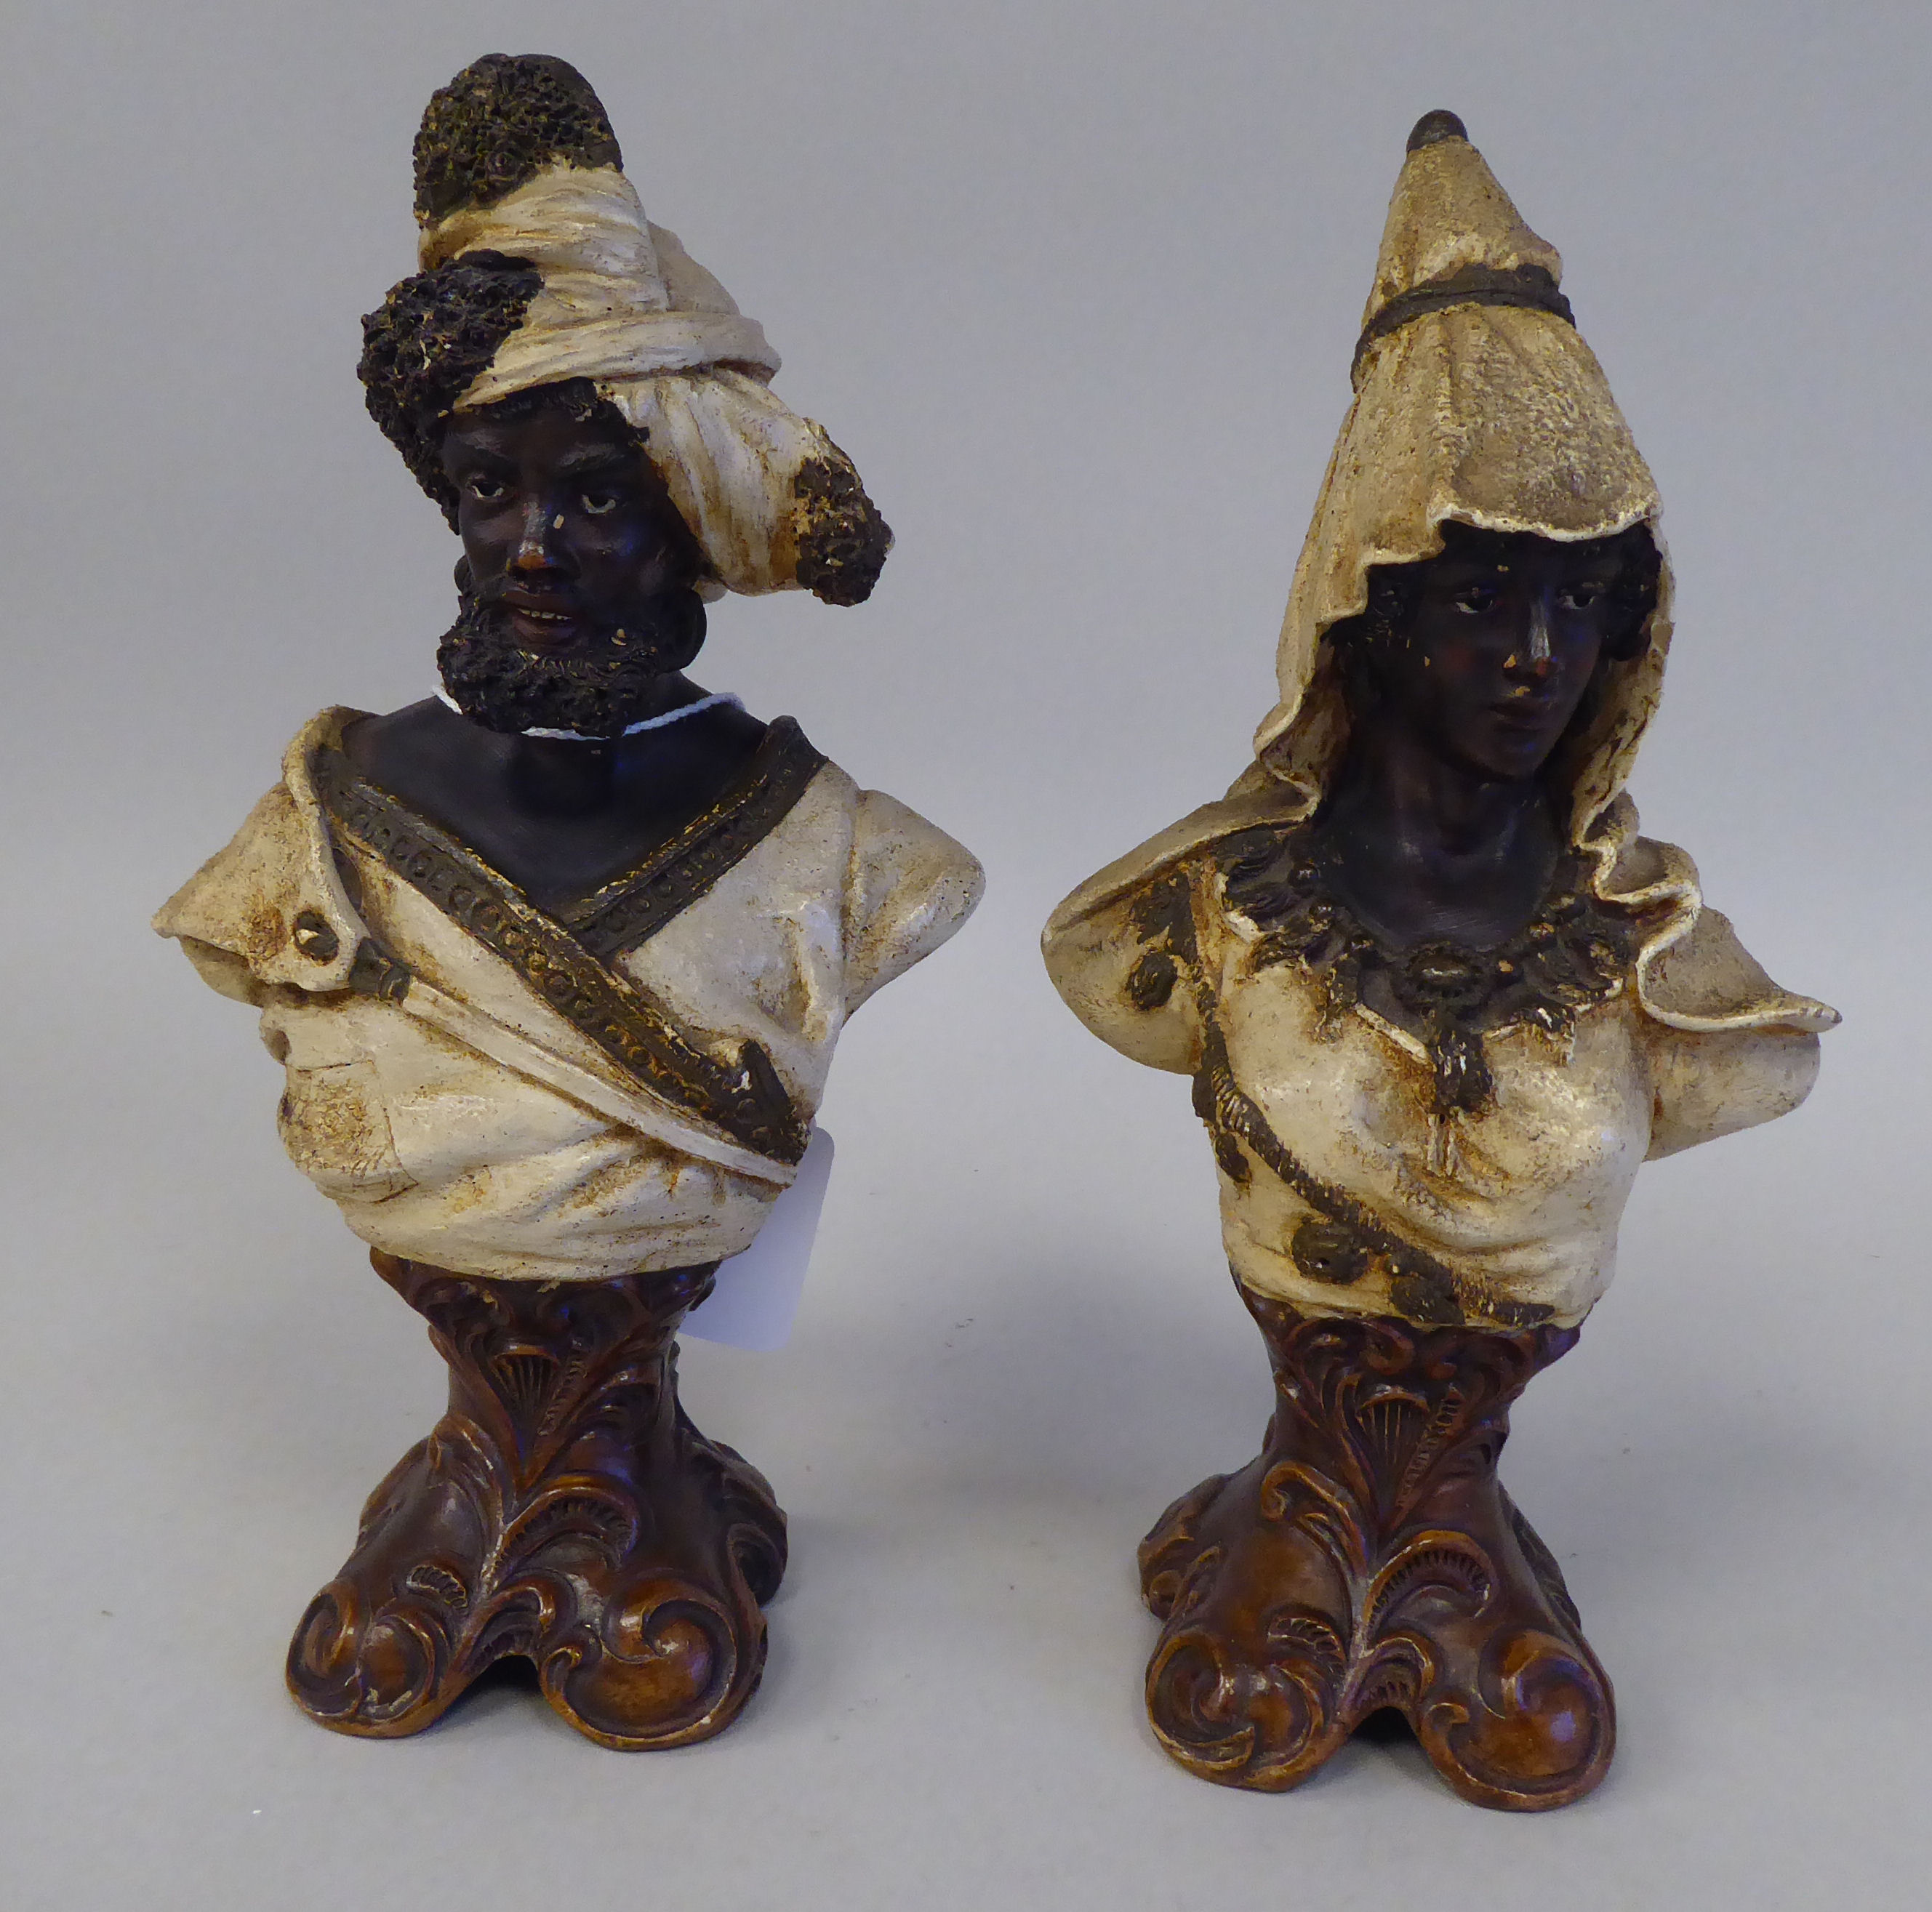 A pair of late 19thC Johann & Maresh painted terracotta Arab busts, a bearded man and a young